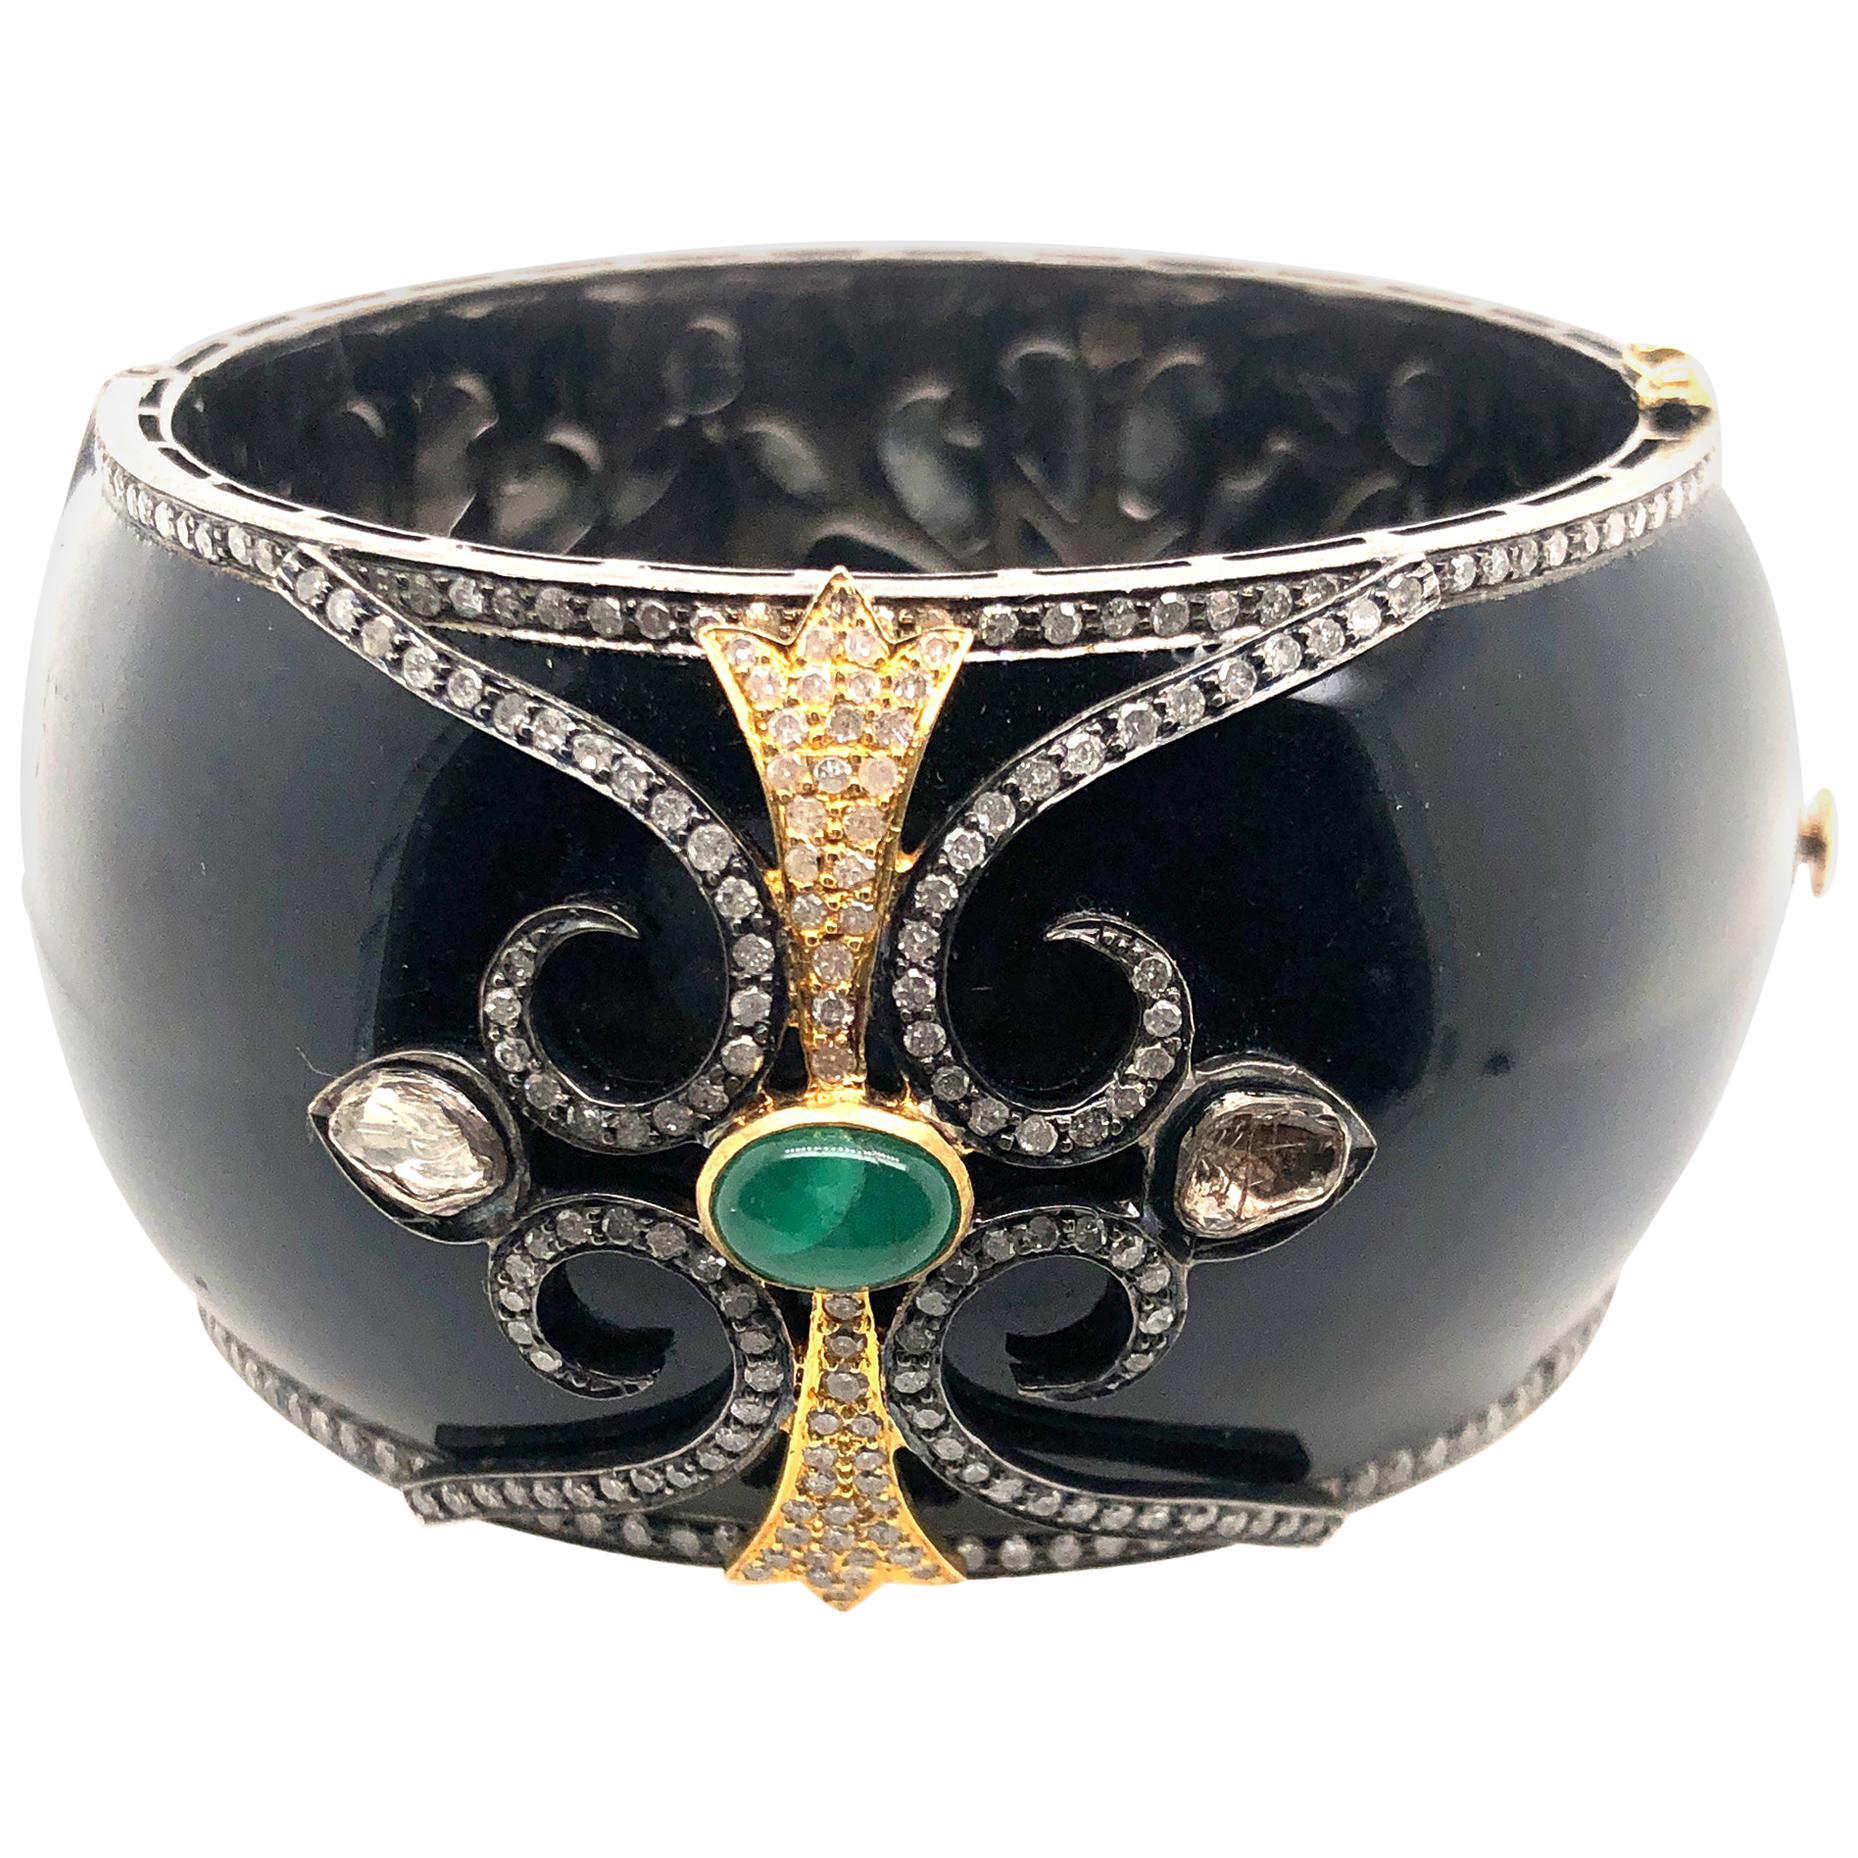 Black Enamel Designer Bangle with Diamonds and Emerald in Gold and Silver